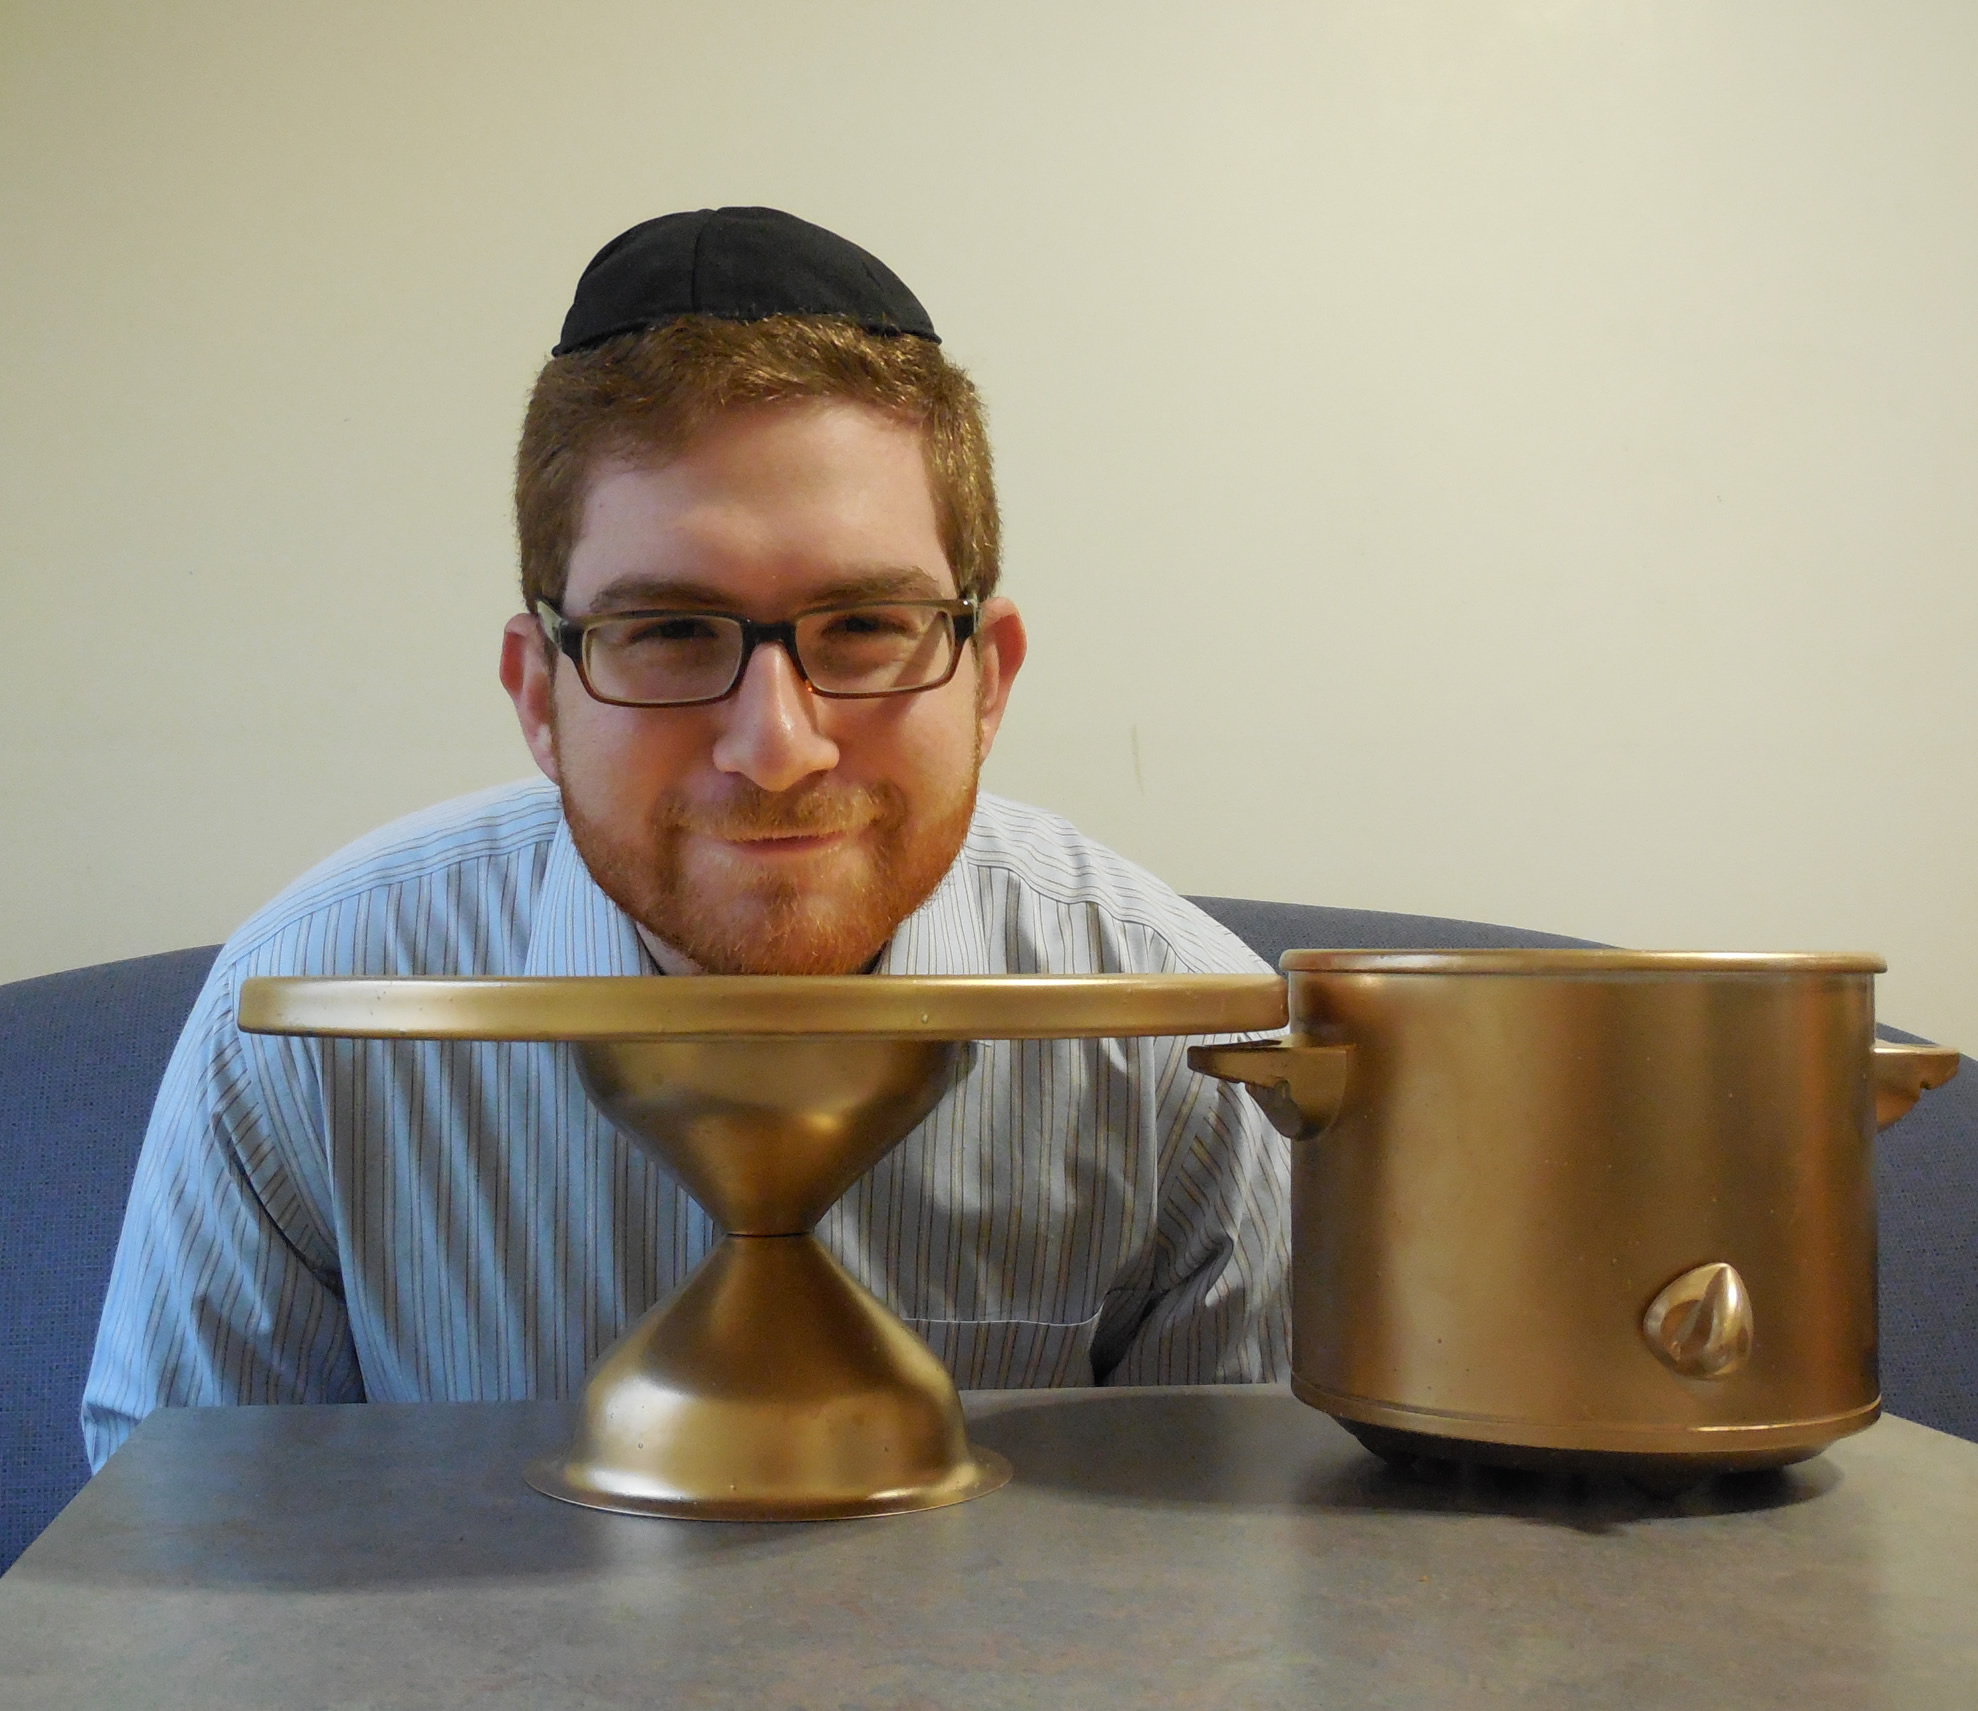 Avrumi Weiser, People\'s Choice Winner of the 2013 Cholent Cook-off and Bake-off, with his "Golden Crock Pot" and "Golden Platter" awards.